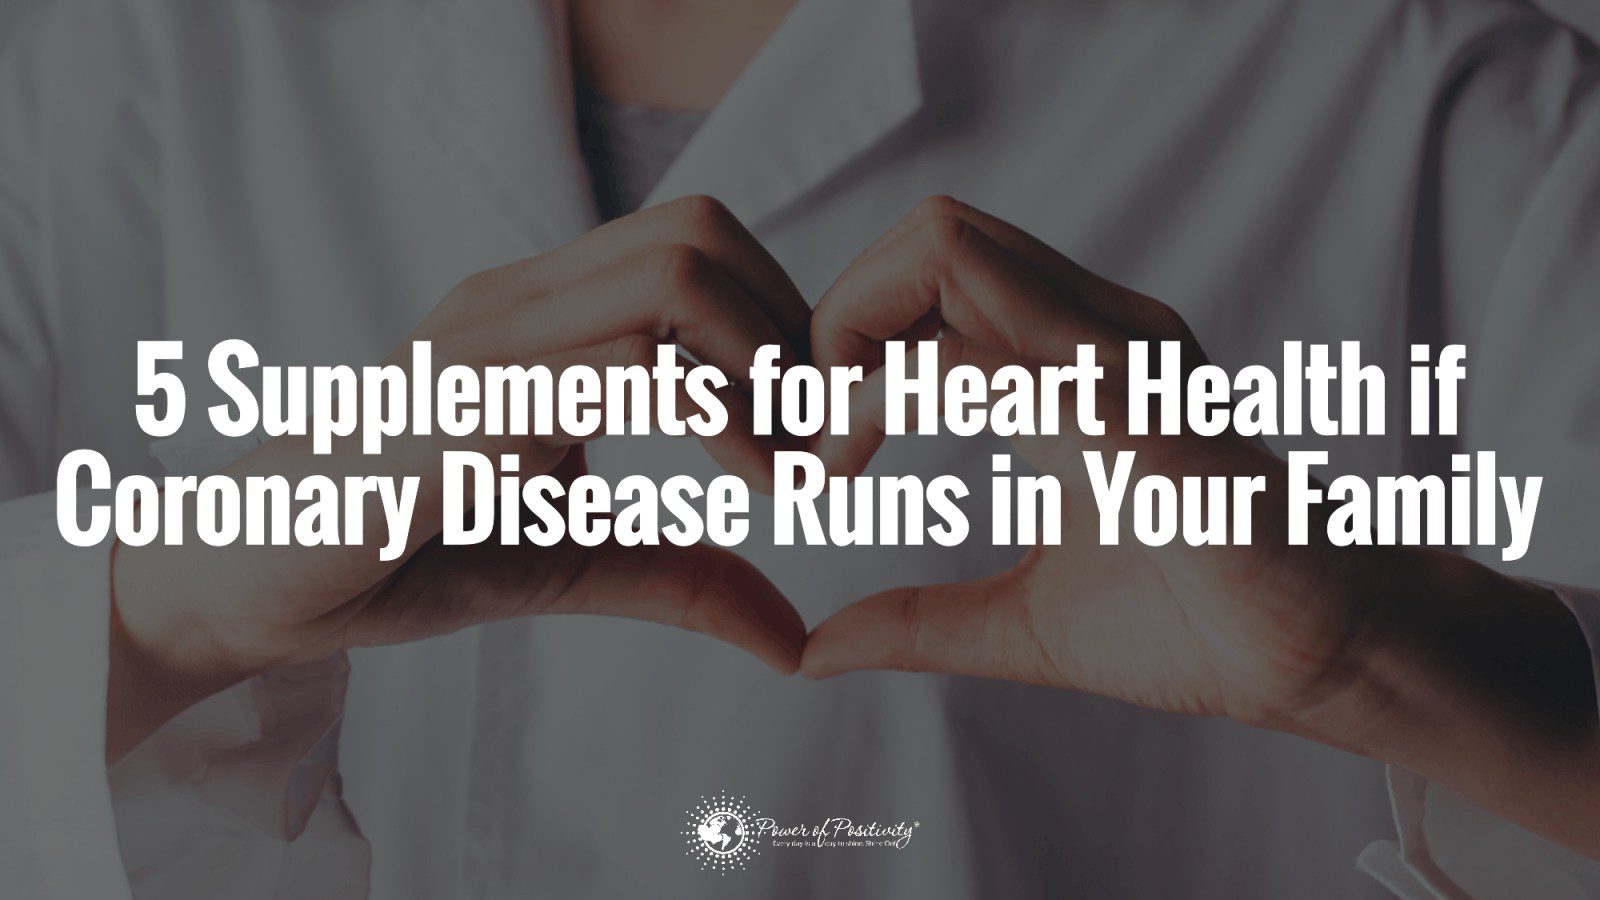 5 Supplements for Heart Health if Coronary Disease Runs in Your Family